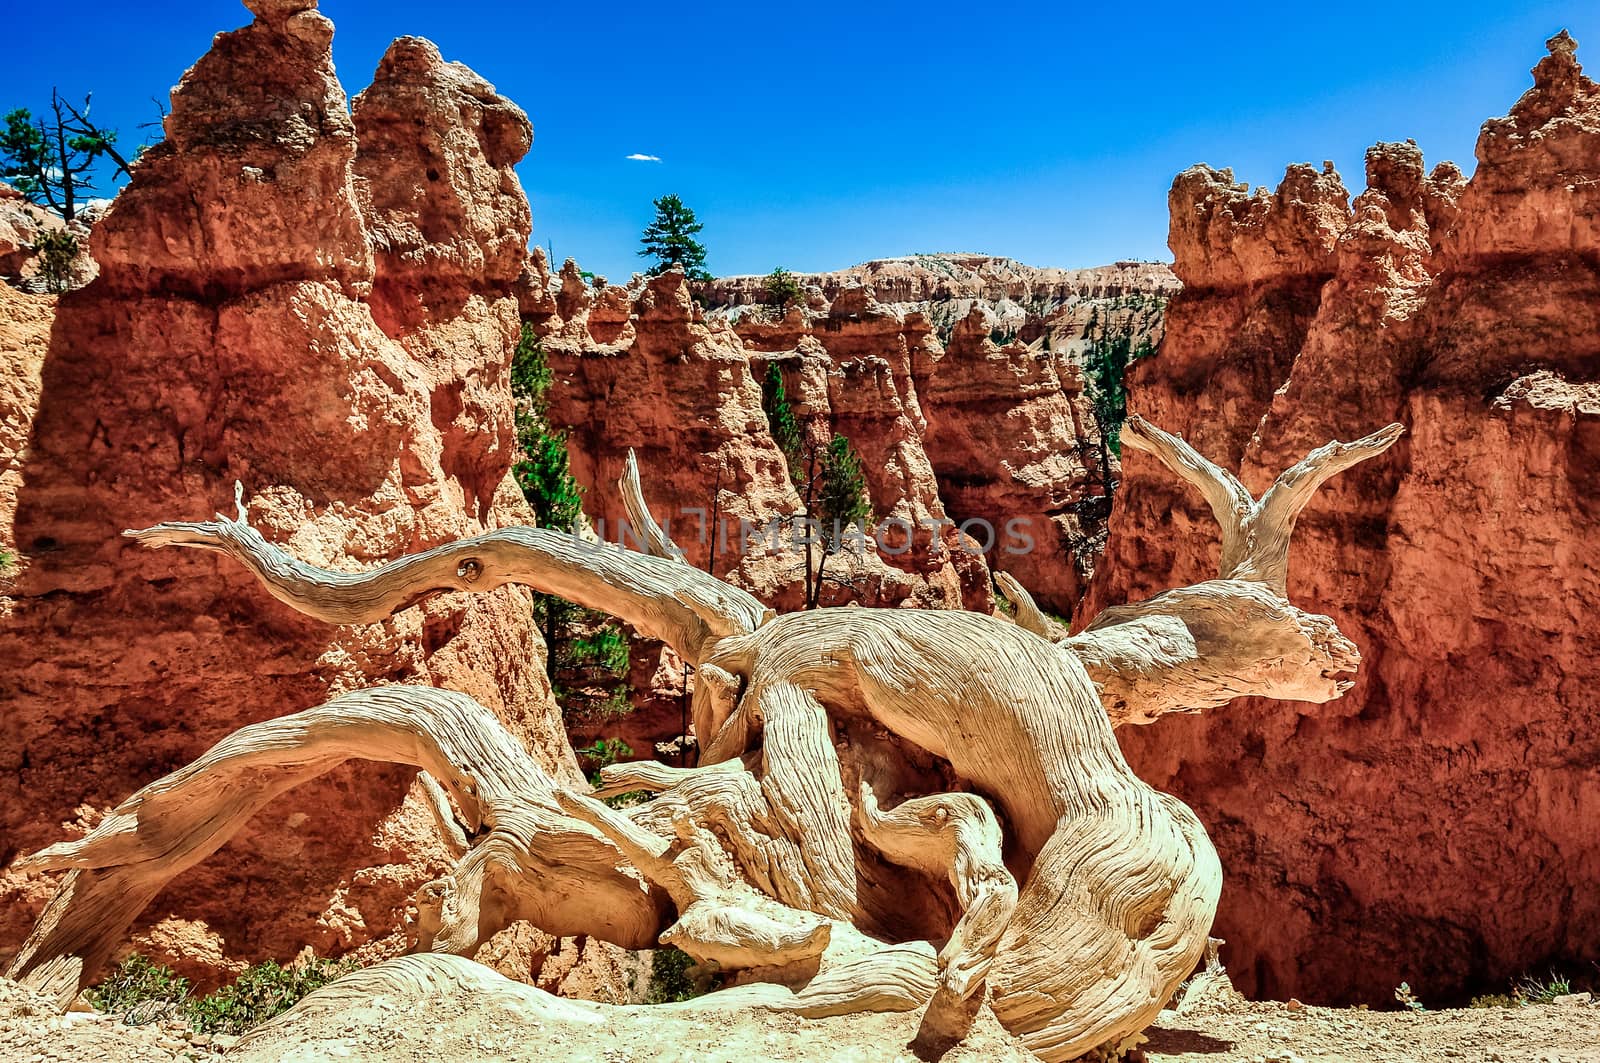 Dry tree trunk and eroded rocks in Bryce Canyon by martinm303